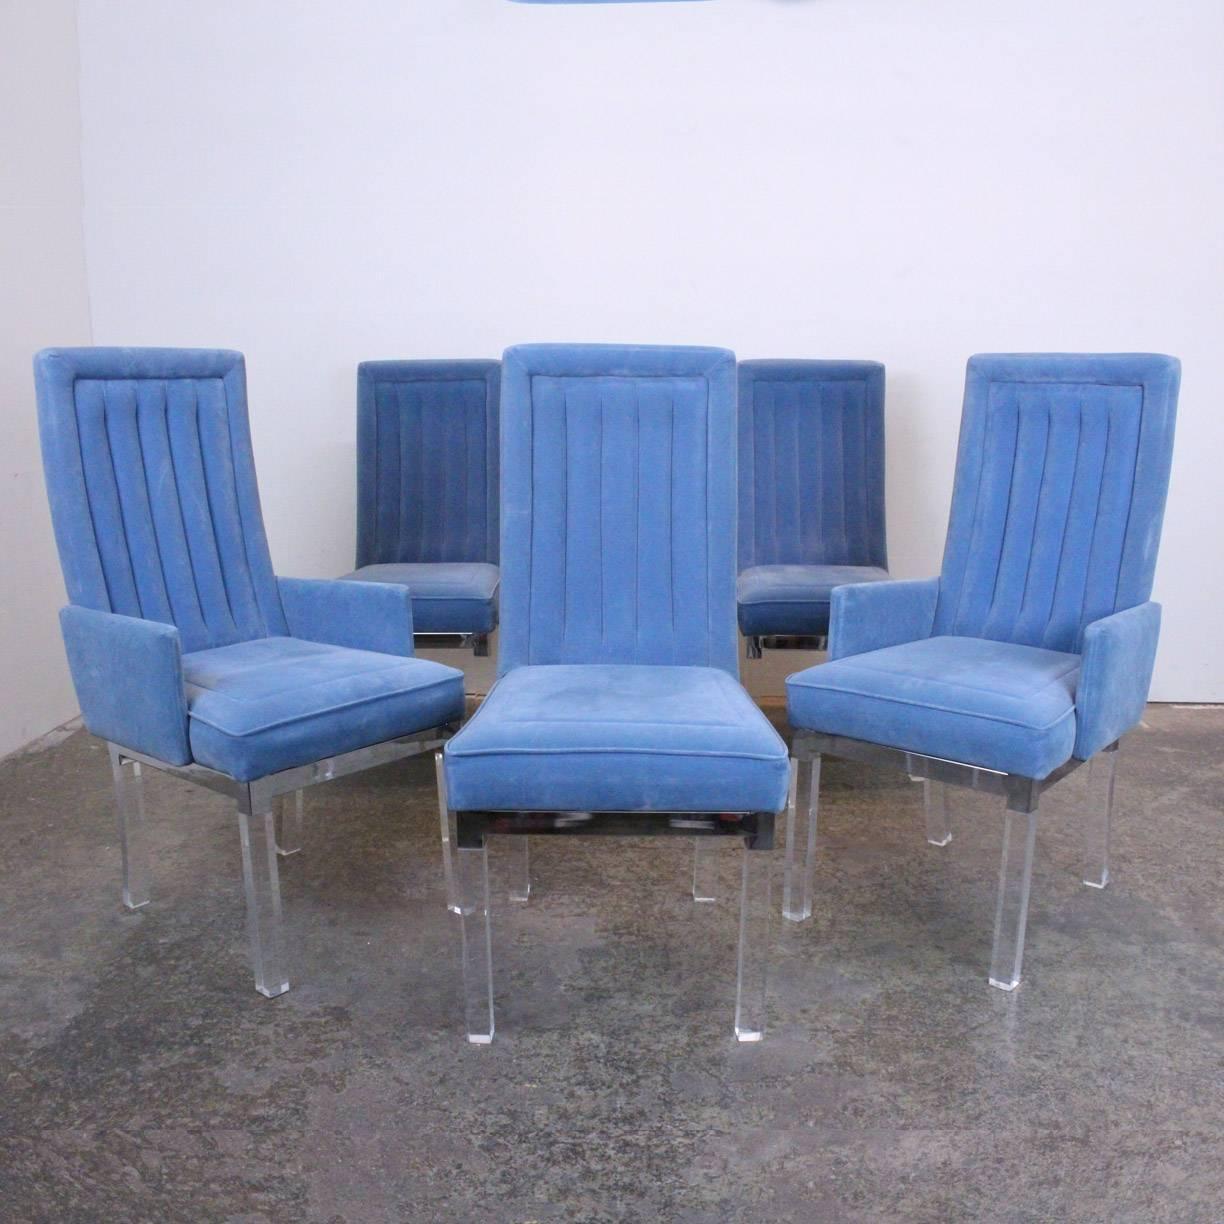 Set of ten Charles Hollis Jones Lucite dining chairs.

Dimensions: 20" W x 22" D x 40.5" T (armchair) 19" W x 22.5" D x 40.5" T (side)
seat height 17.5".